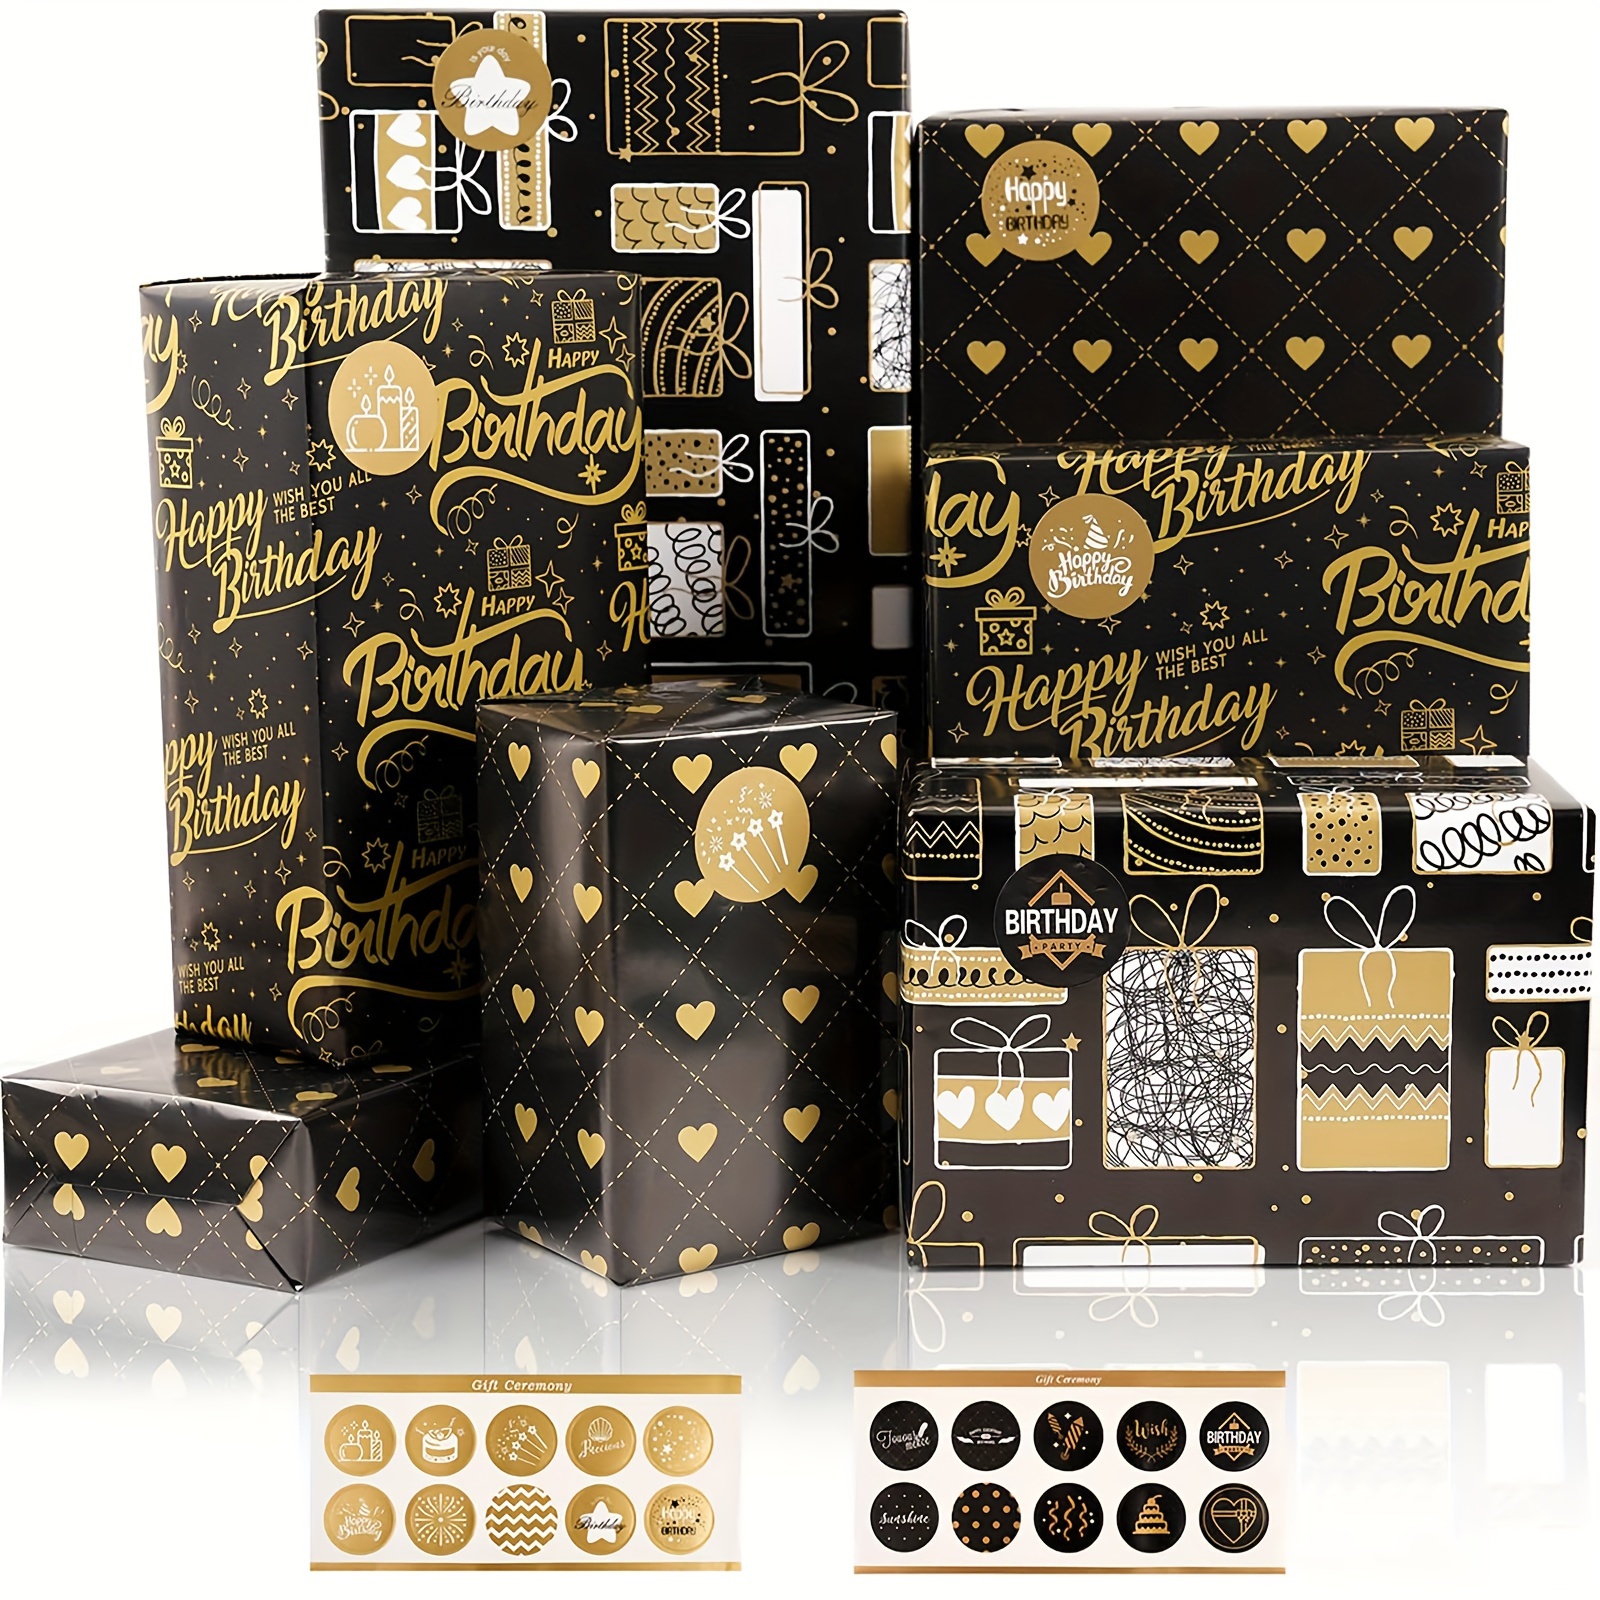 

Elegant Black & Golden Gift Wrapping Paper Set - 6 Sheets With Heart Patterns & Stickers, Perfect For Birthdays, Graduations, Baby Showers - 27.5"x19.7